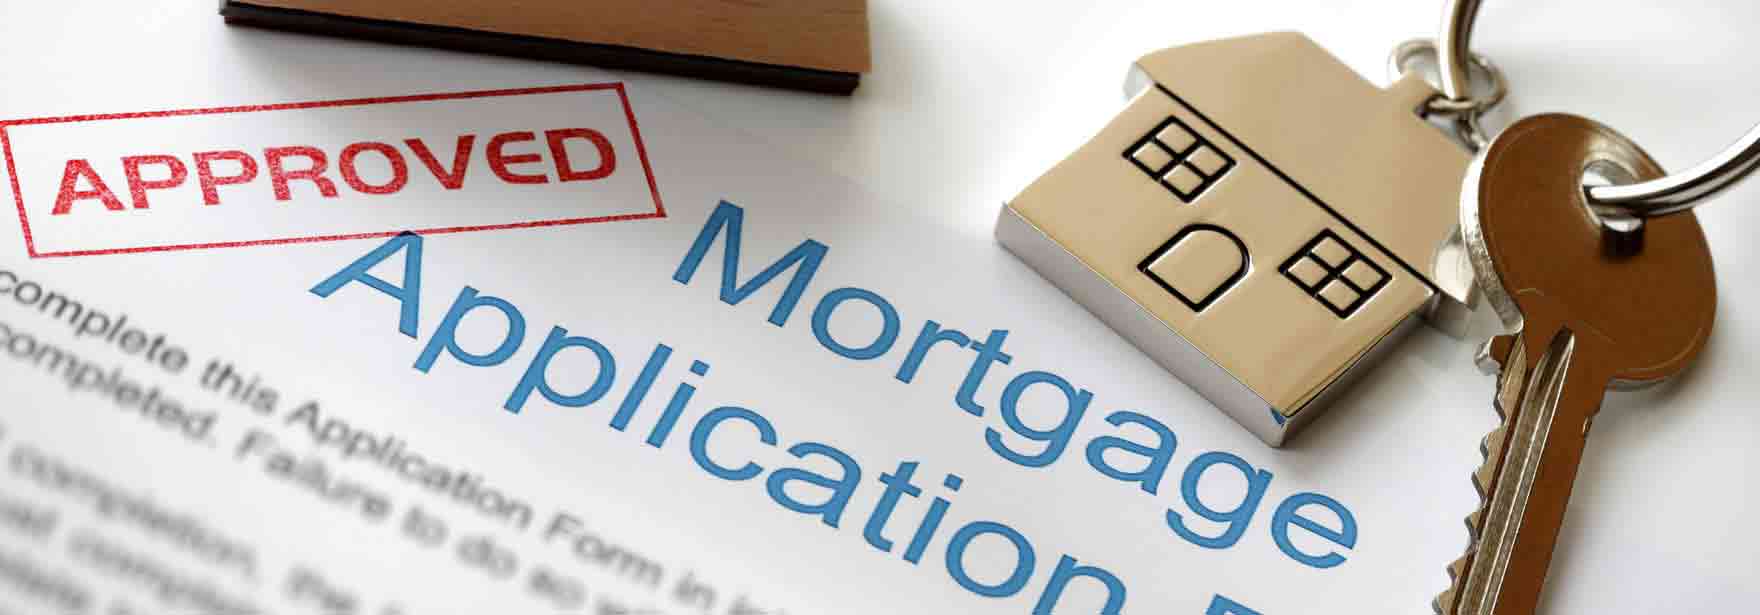 Get pre-approved for a home mortgage with Valley Mortgage, Inc. of Fargo, North Dakota.